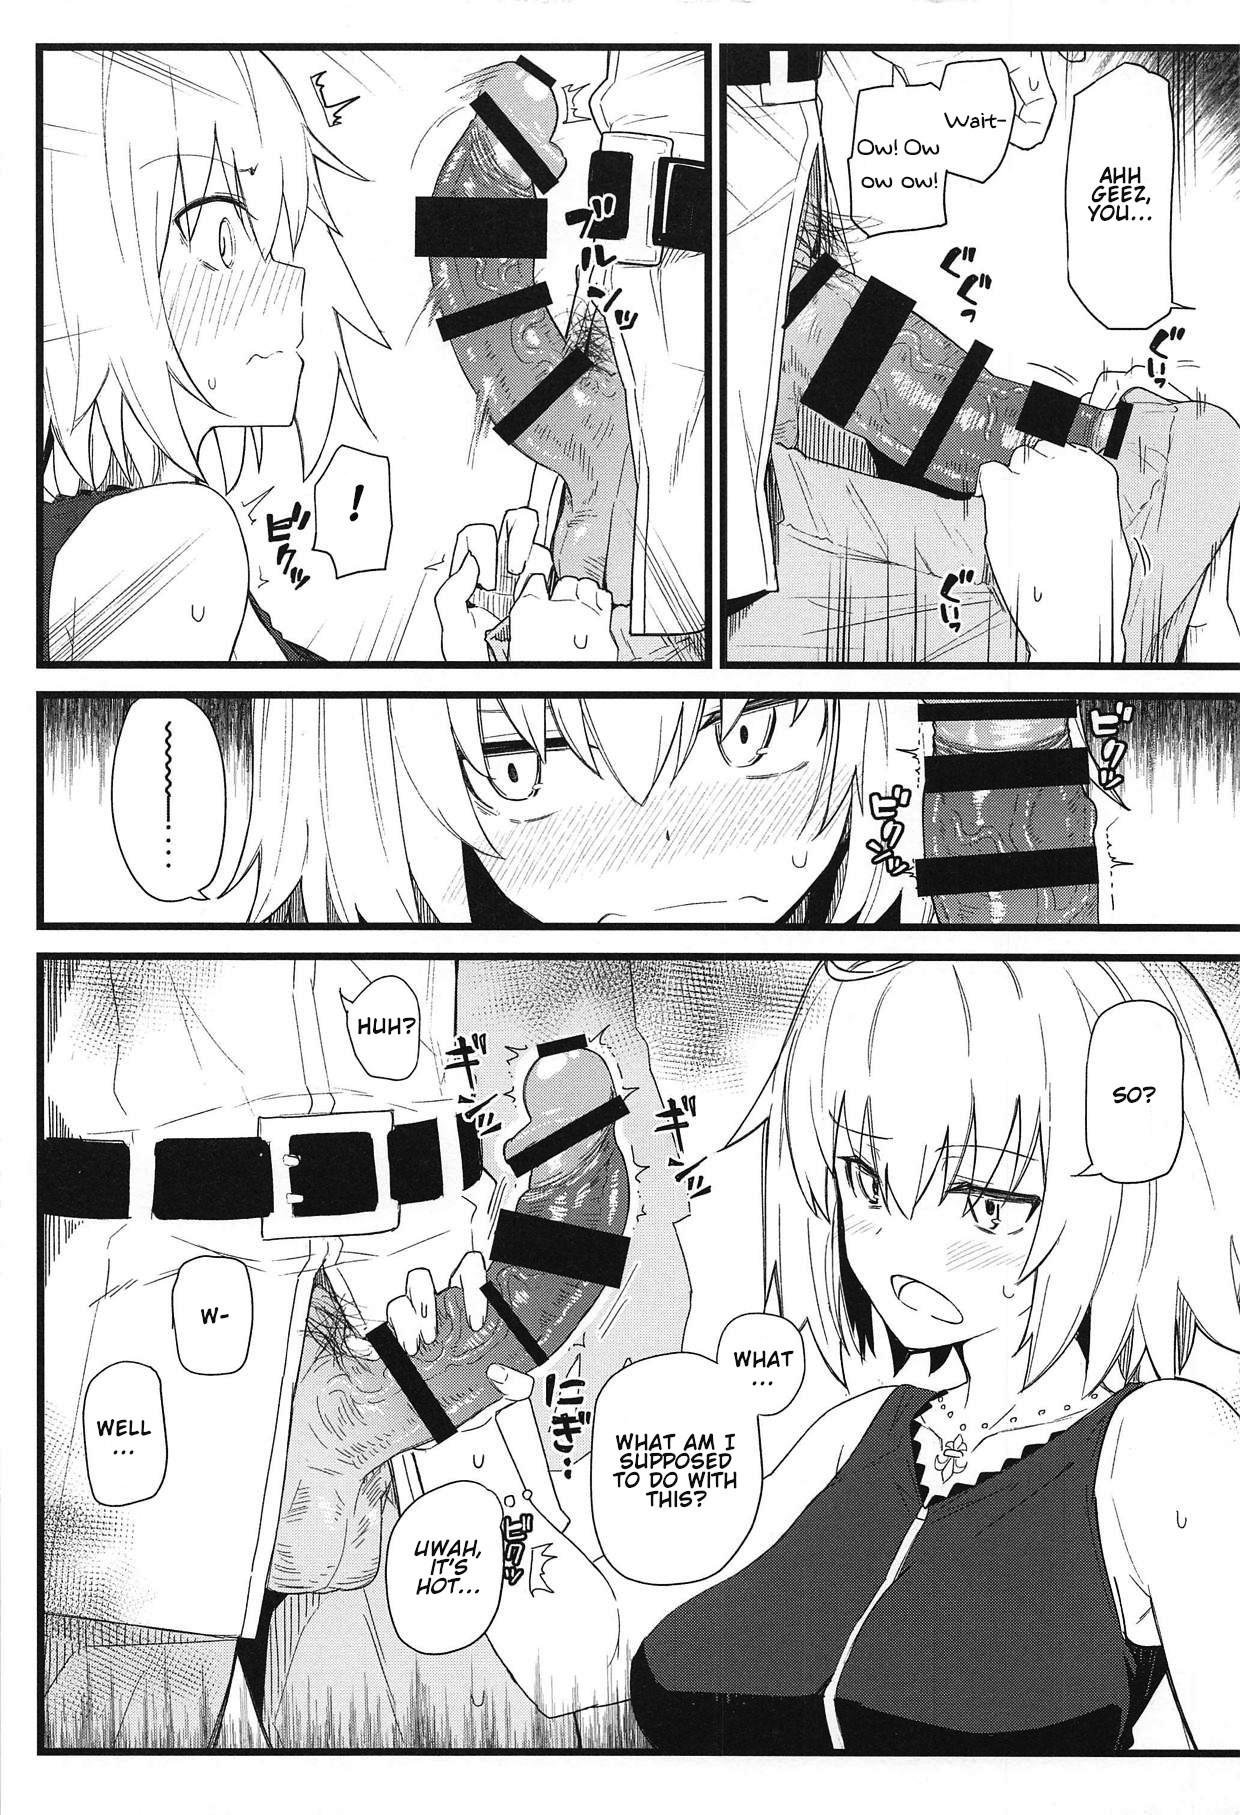 Real Orgasms GIRLFriend's 15 - Fate grand order Gay Domination - Page 5